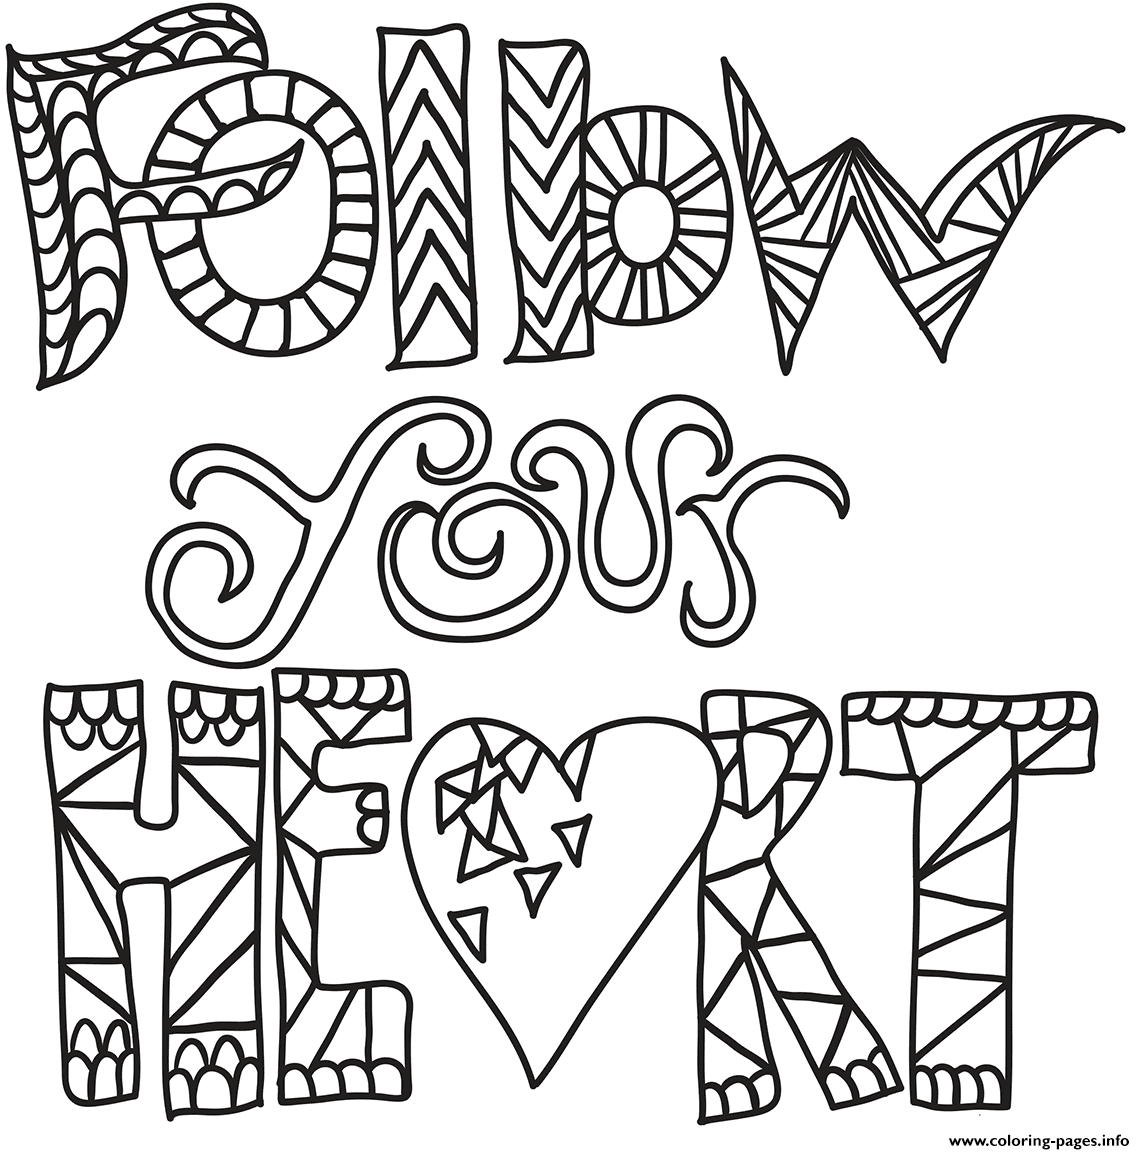 Follow Your Heart coloring